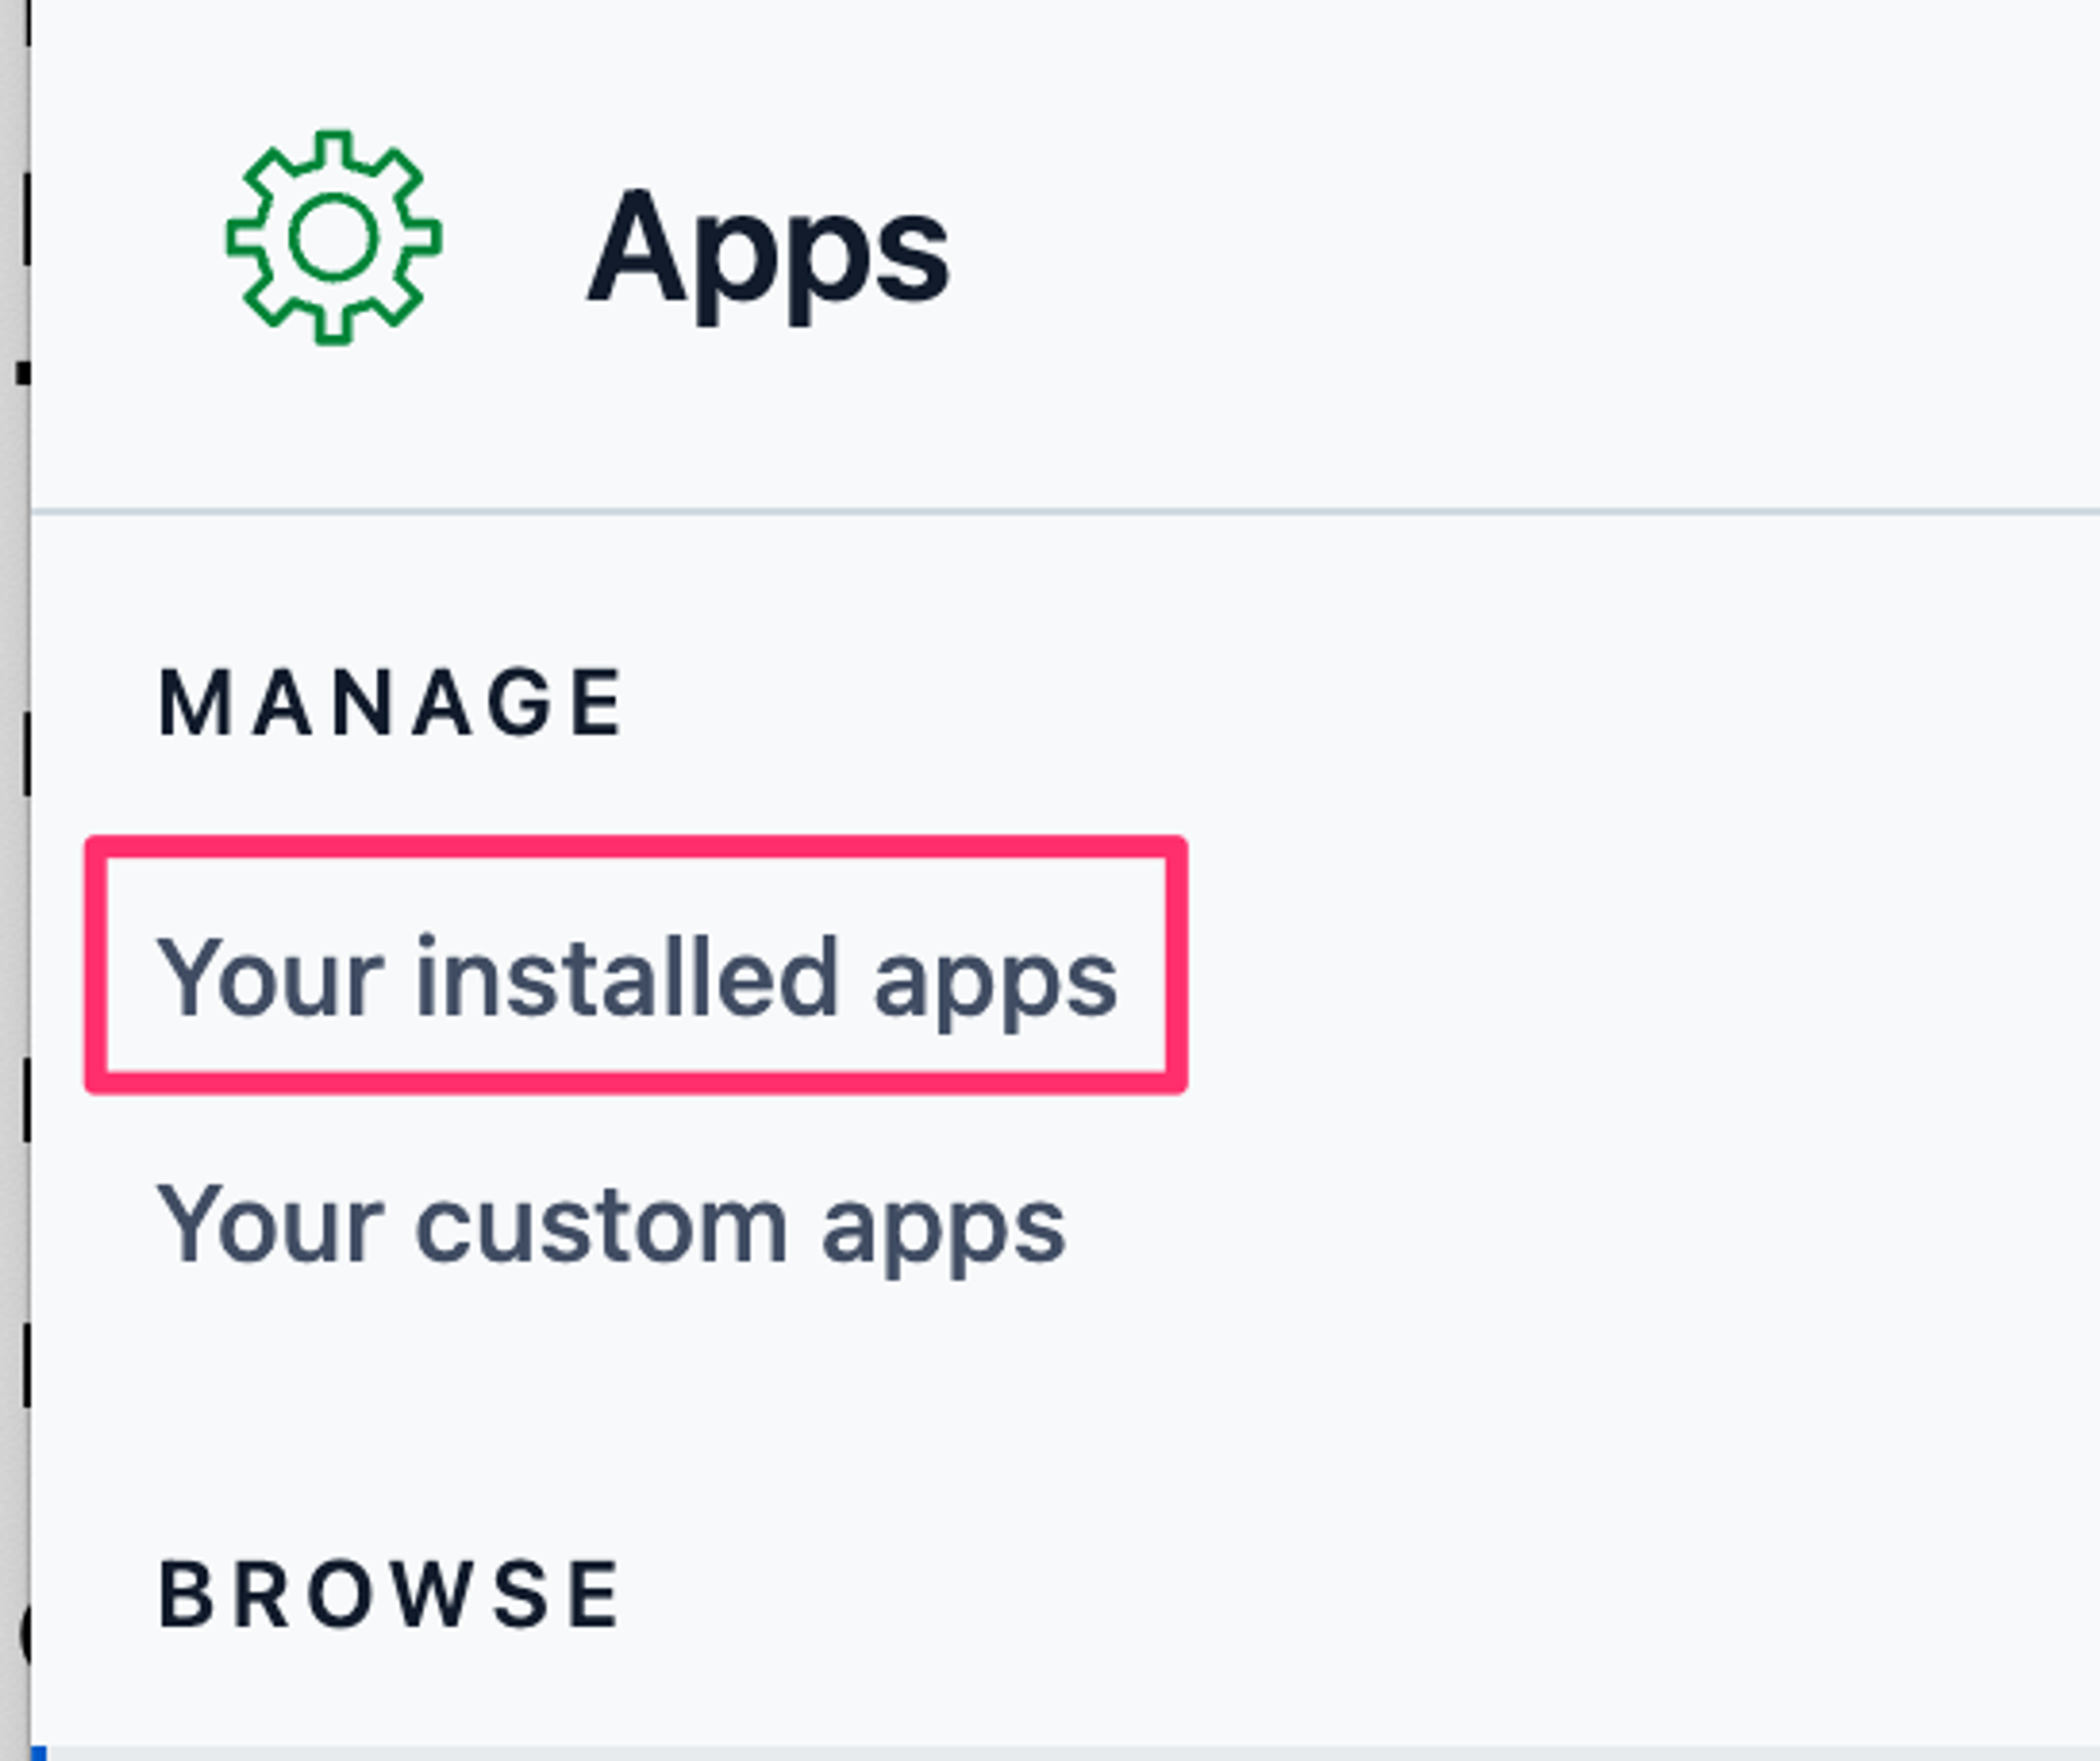 Select the "Your installed apps" menu item in the top left column